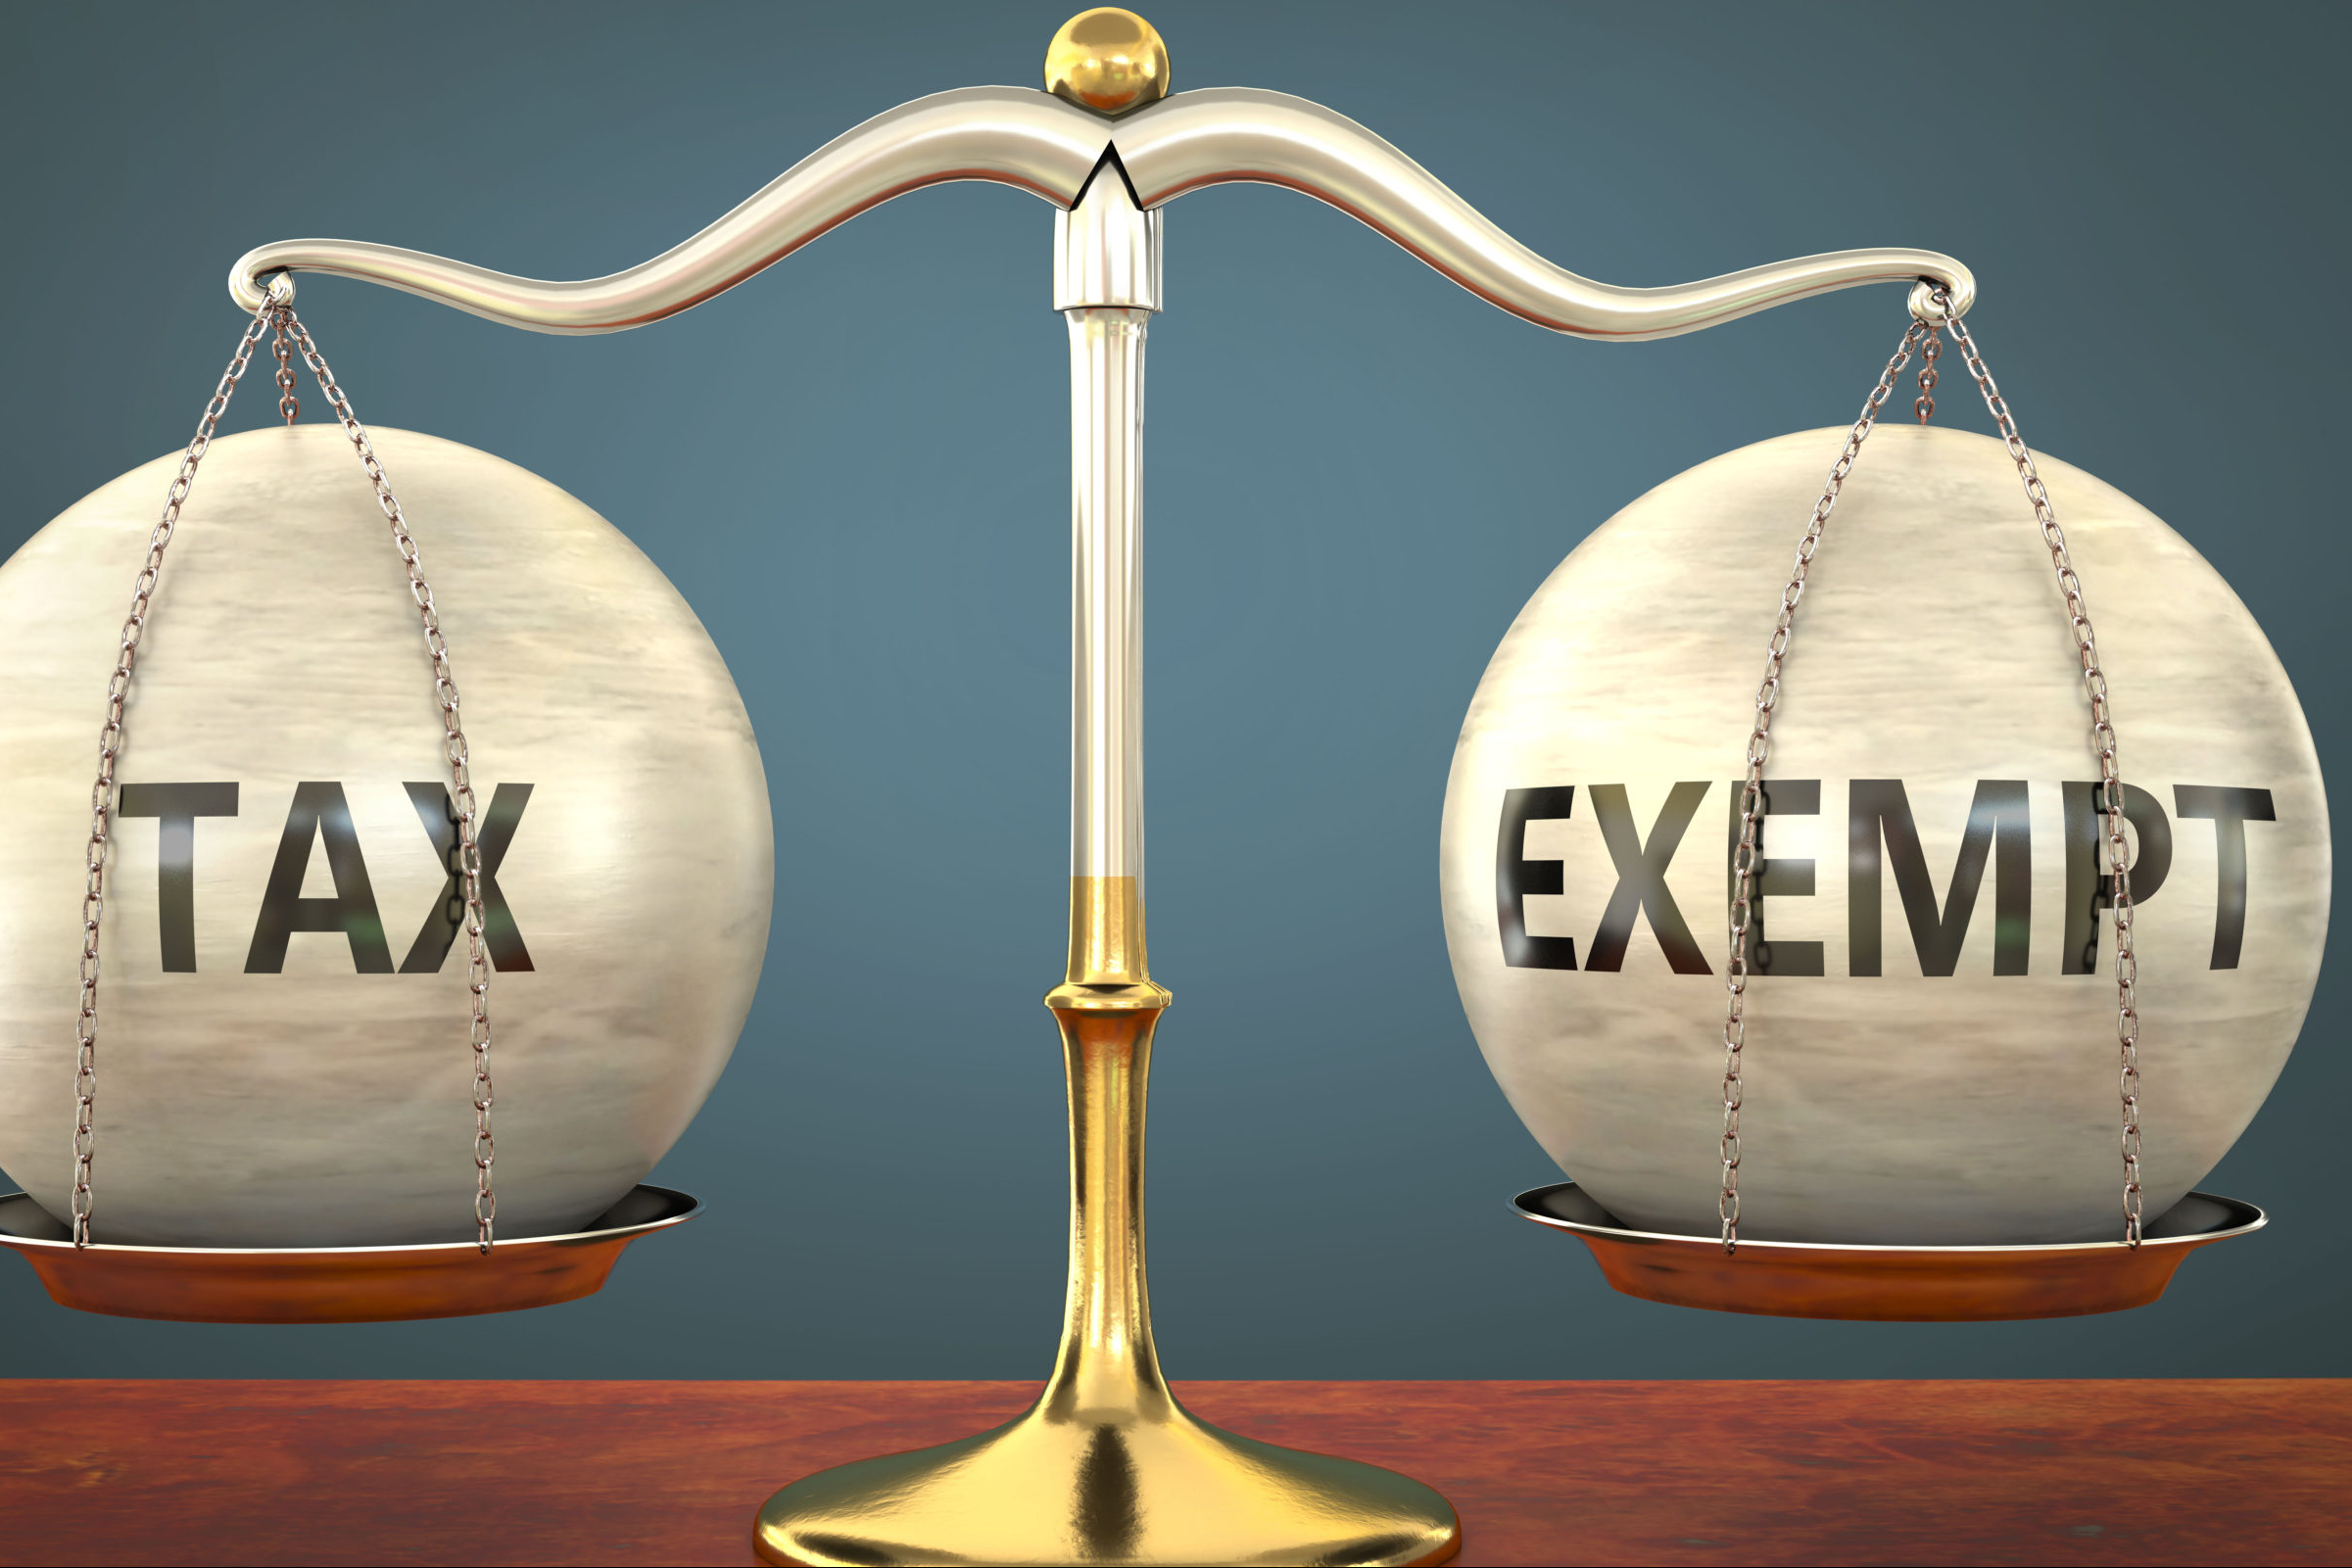 legal scale with the words "tax" and "exempt" on opposite sides